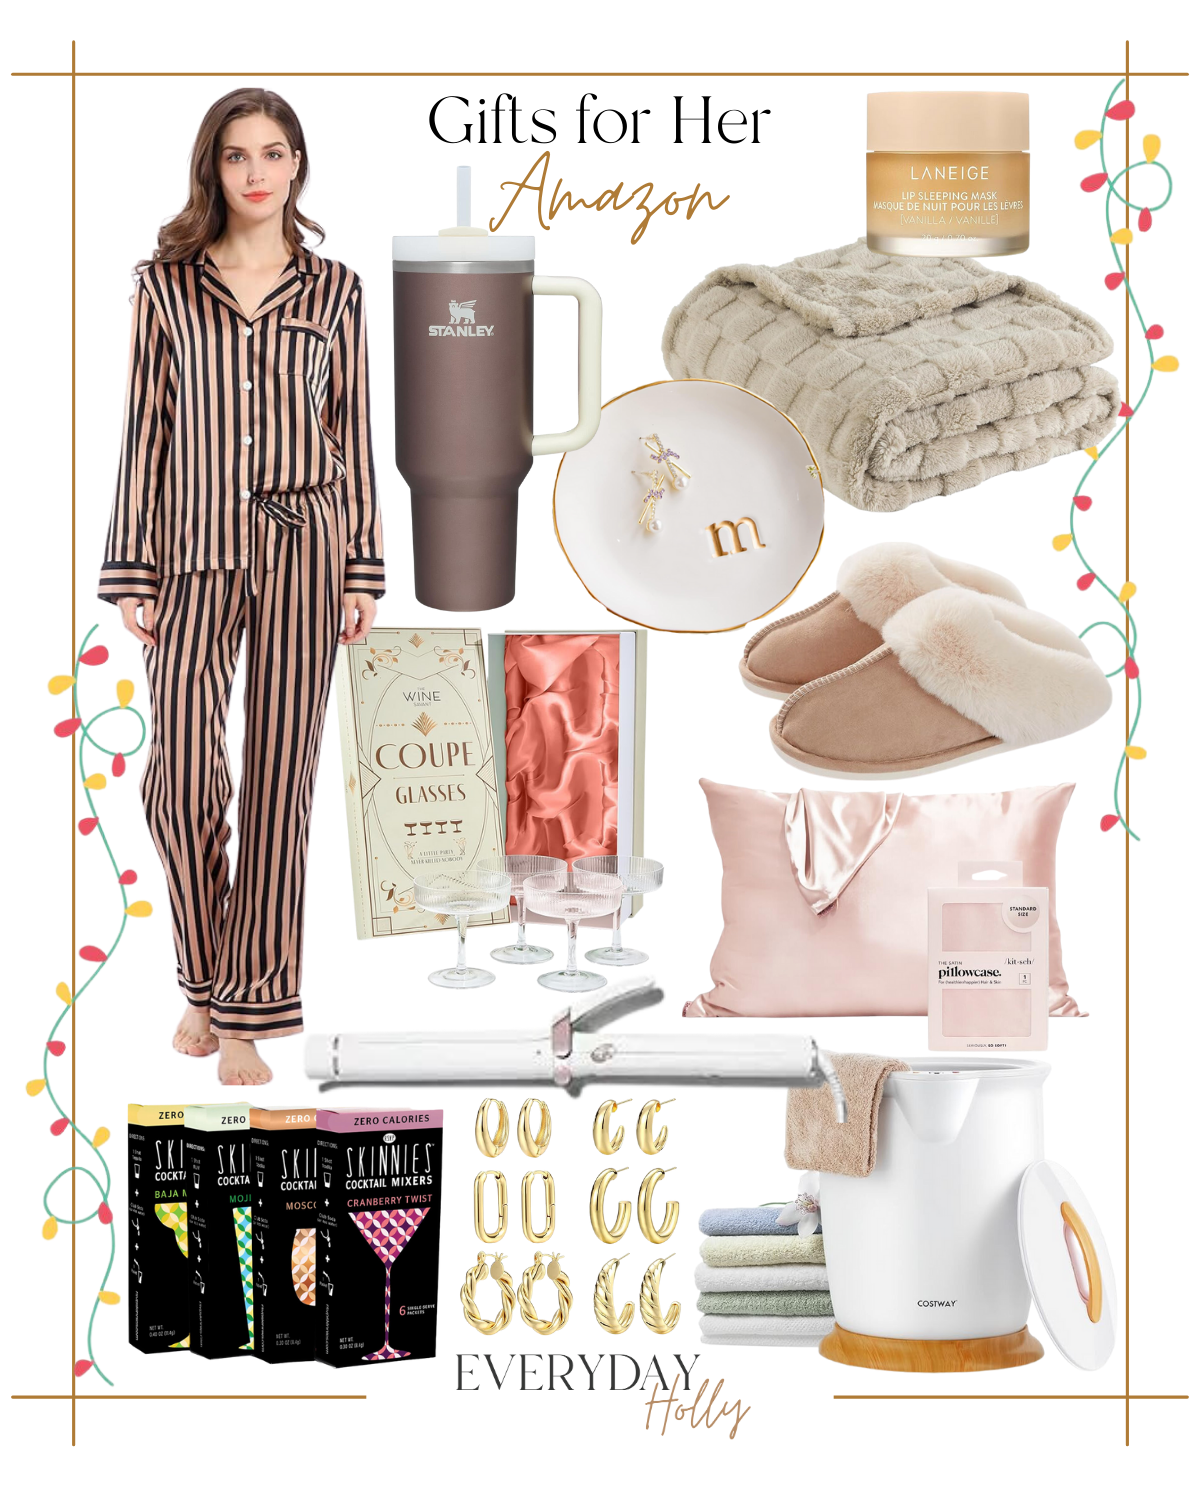 10 Holiday Gift Guides for Everyone This Season | #holiday #giftguide #giftideas #2023 #christmas #gifts #amazon #giftsforher #loungewear #blanket #slippers #jewelry #satin #pressonnails #hairtool #beauty #skincare #hottool